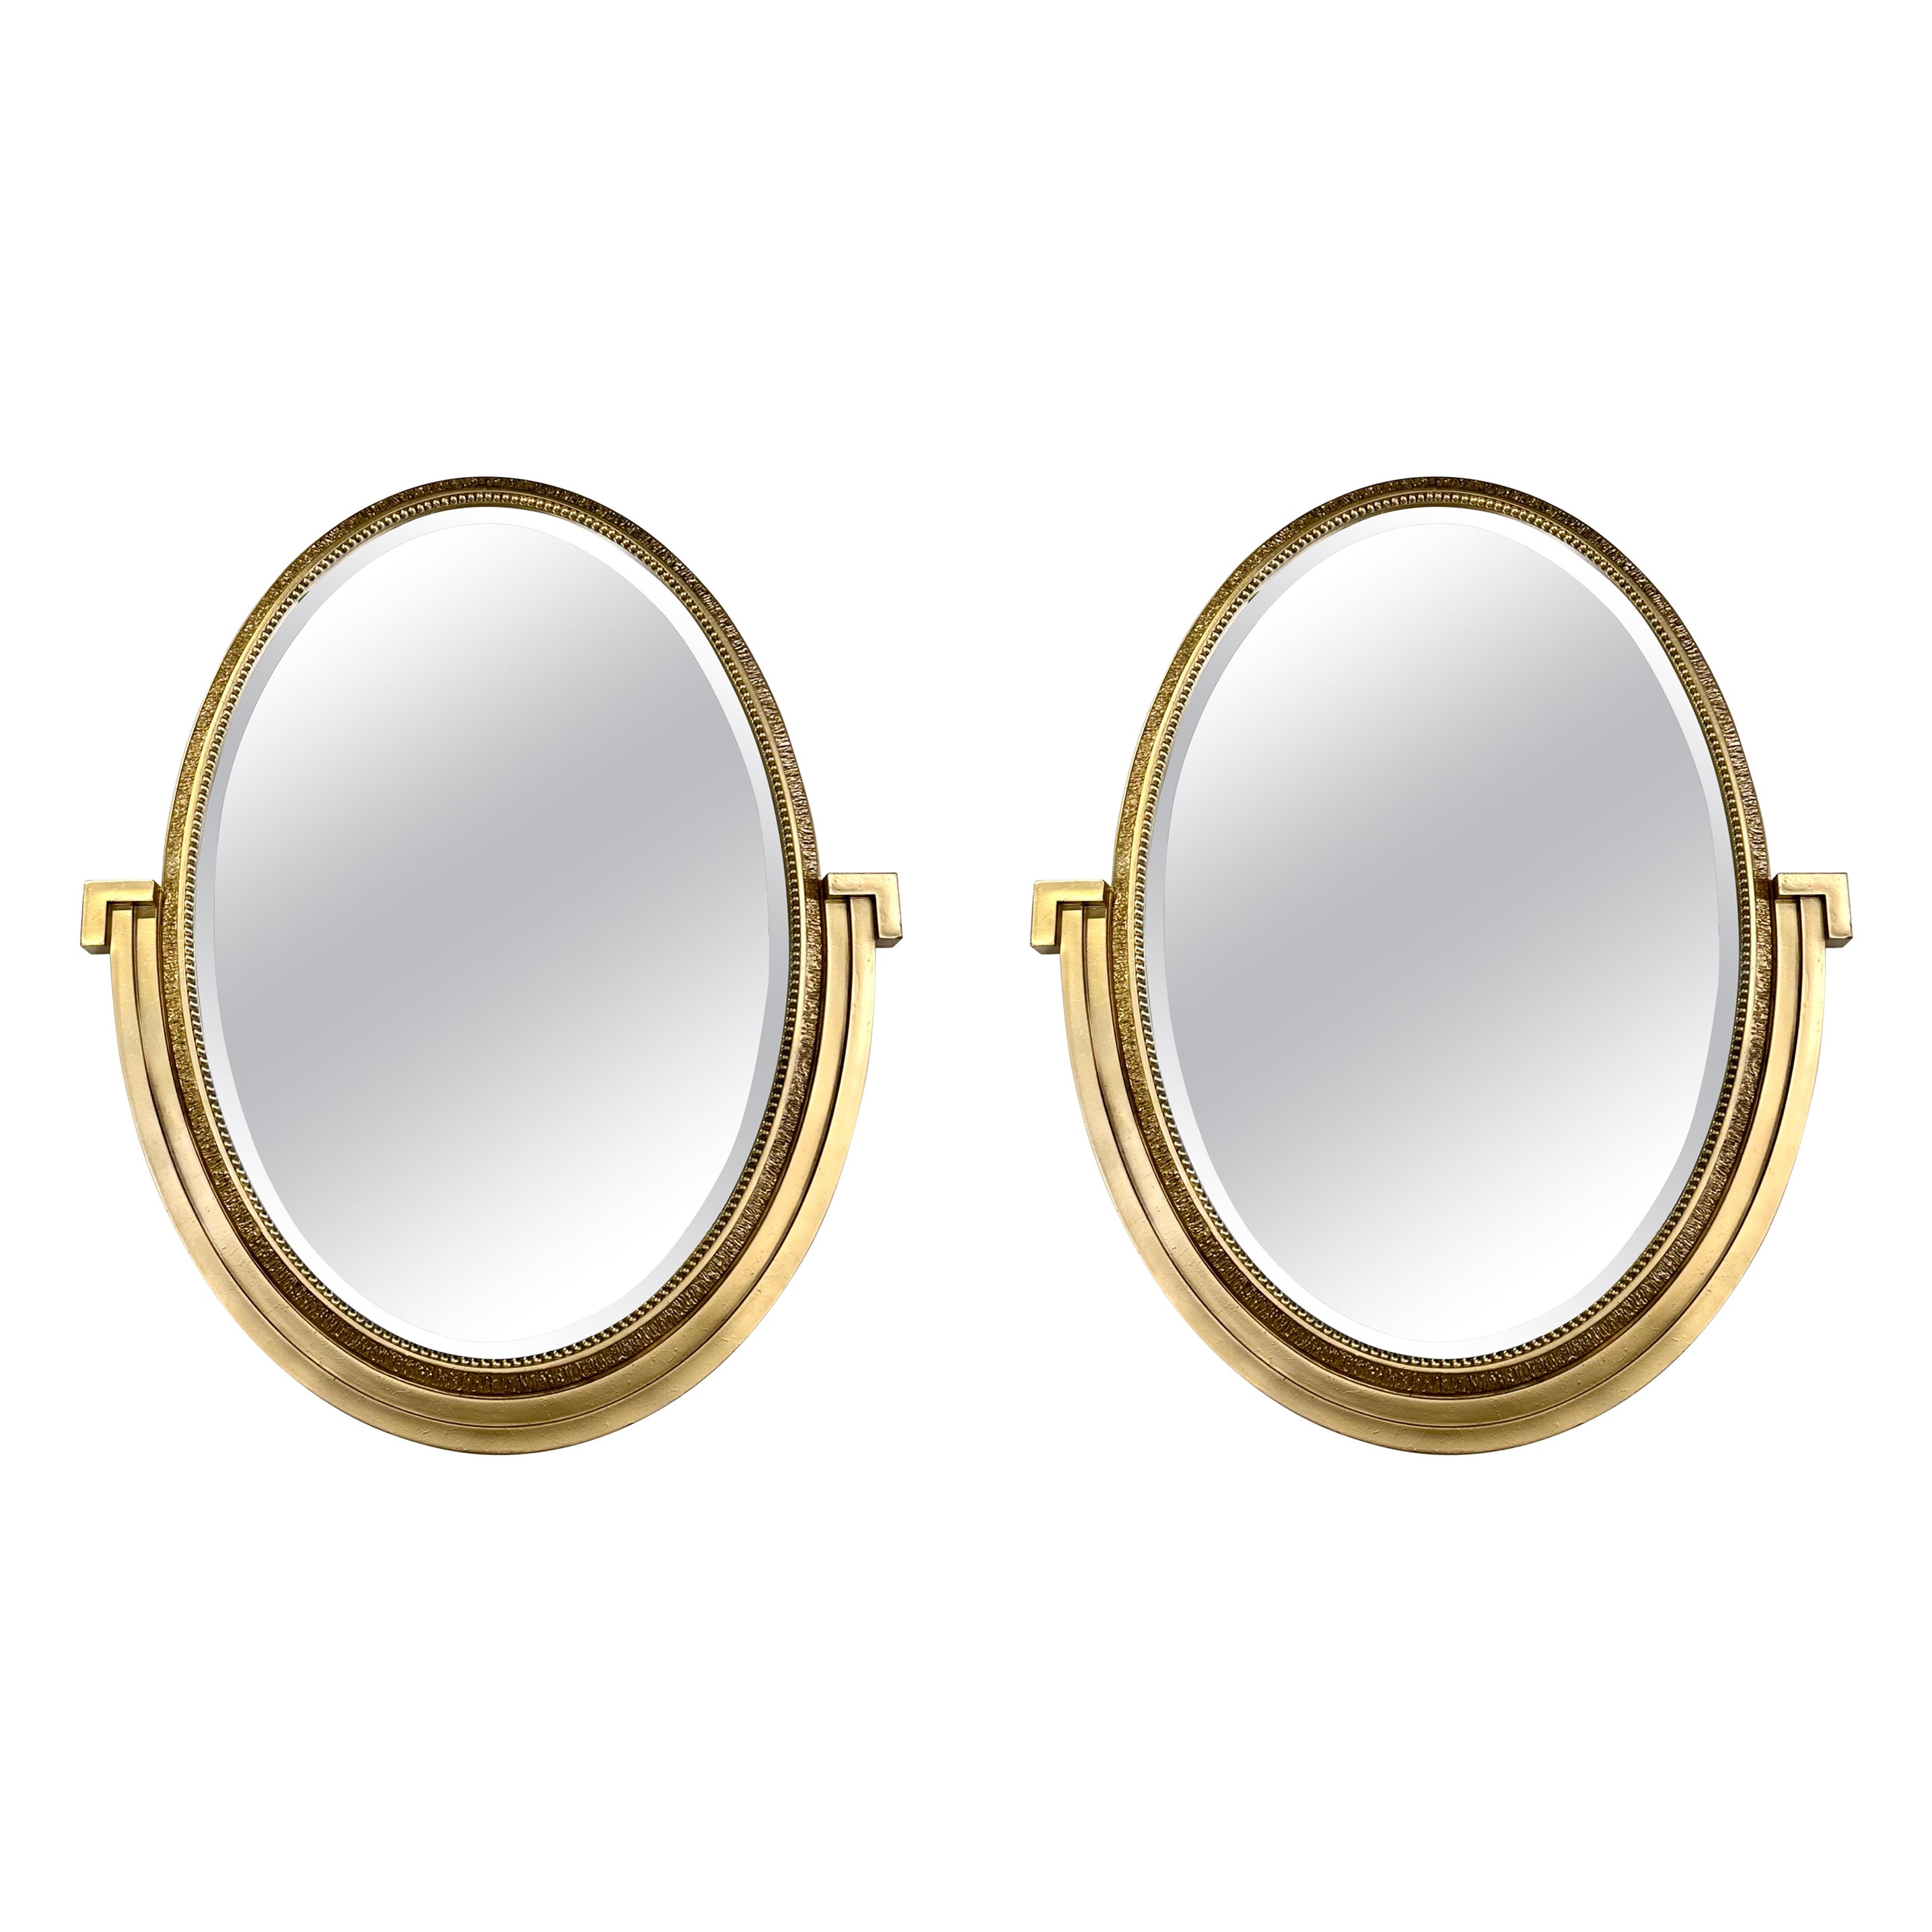 Pair of Neoclassical Gilded Wood Oval Mirrors